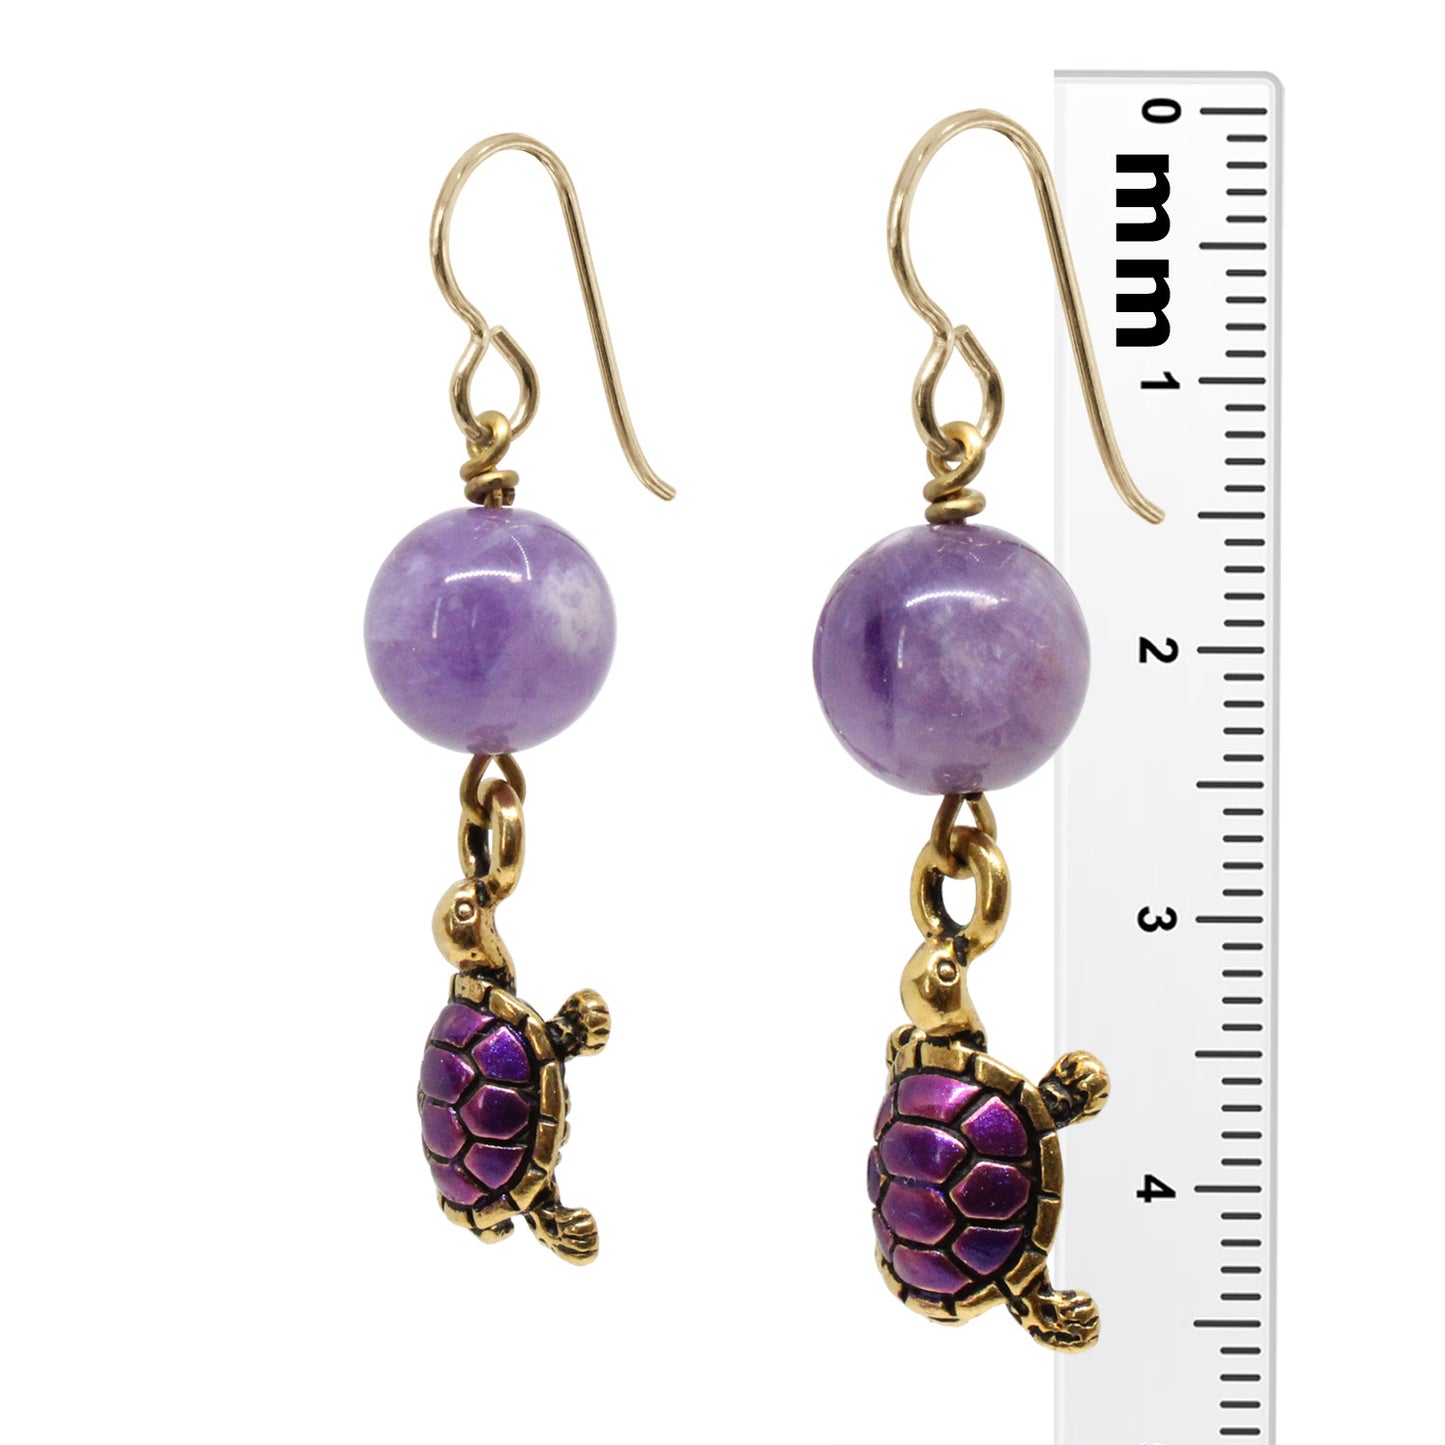 Turtle Earrings / 45mm length / hand painted pewter charms / purple amethyst / gold filled earwires